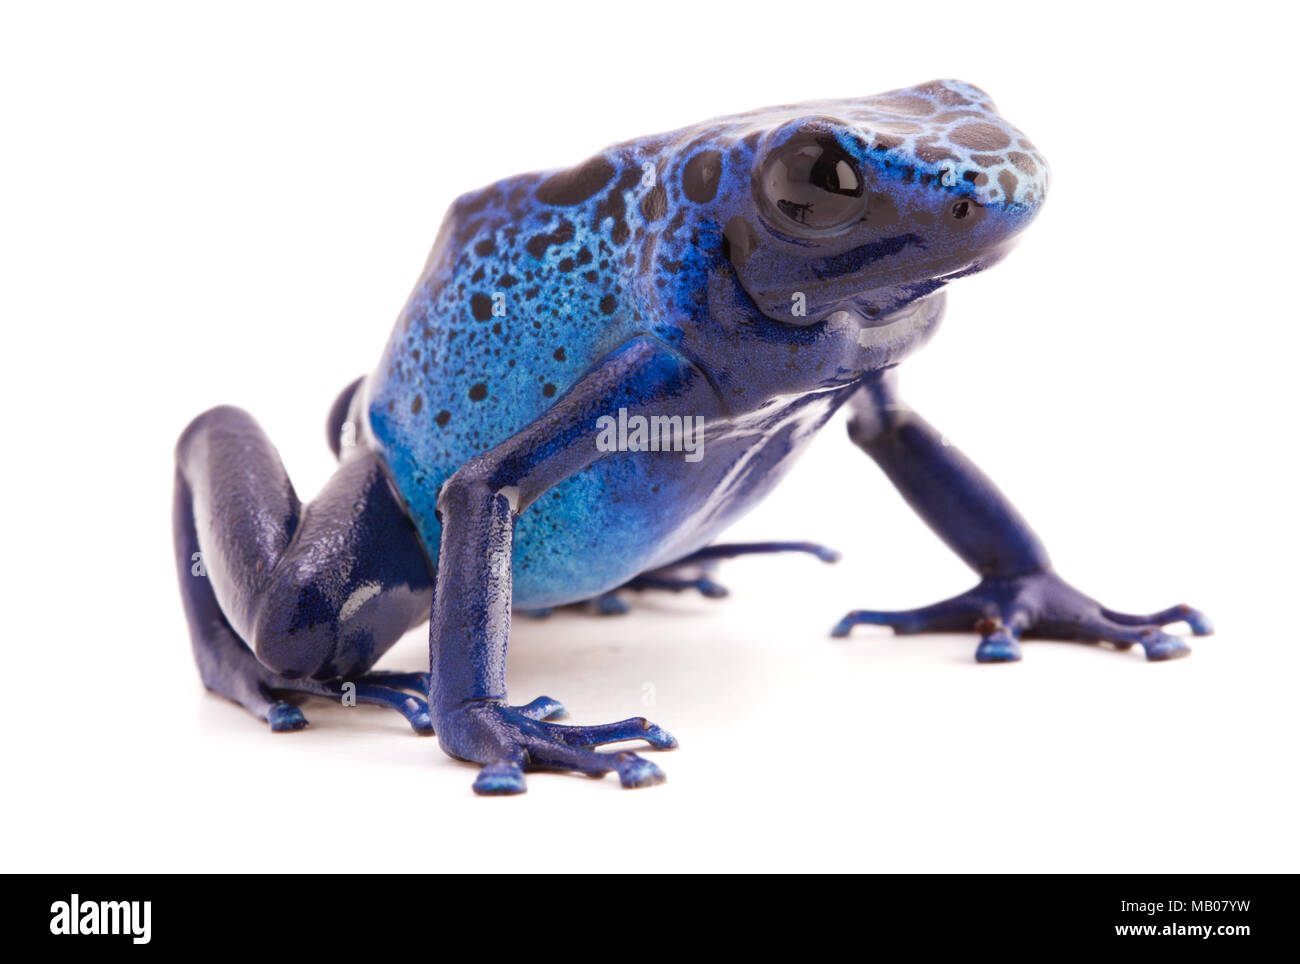 Dendrobates azureus, a vibrant blue poison dart frog from the tropical Amazon rain forest in Suriname. Isolated on white background. Stock Photo